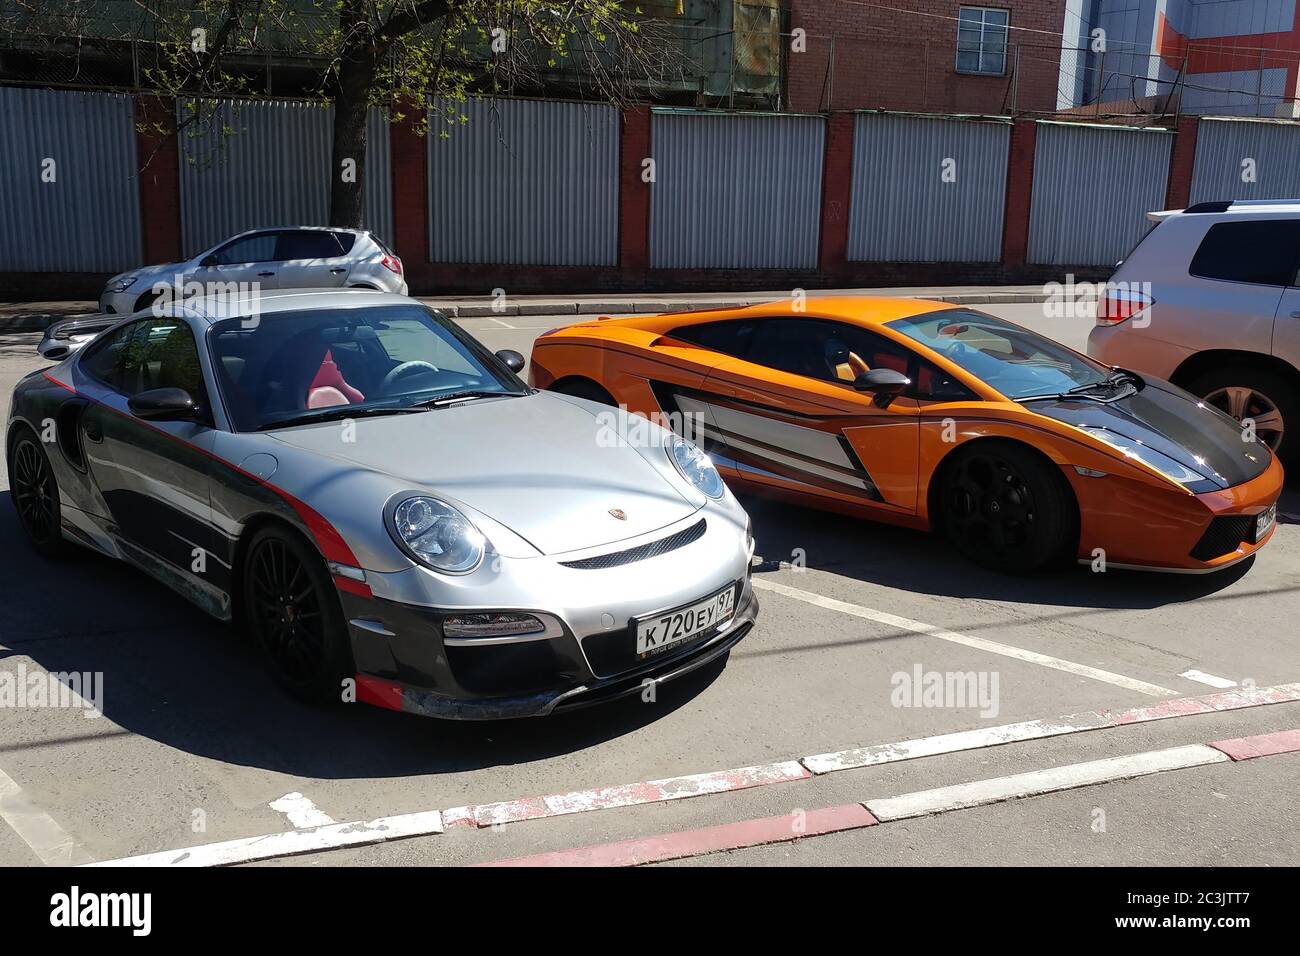 Moscow, Russia - April 14, 2019: exclusive Porsche 911 with aerography and Mansory tuning near bright orange Lamborghini Gallardo with carbon hood and other parts parked on the street Stock Photo